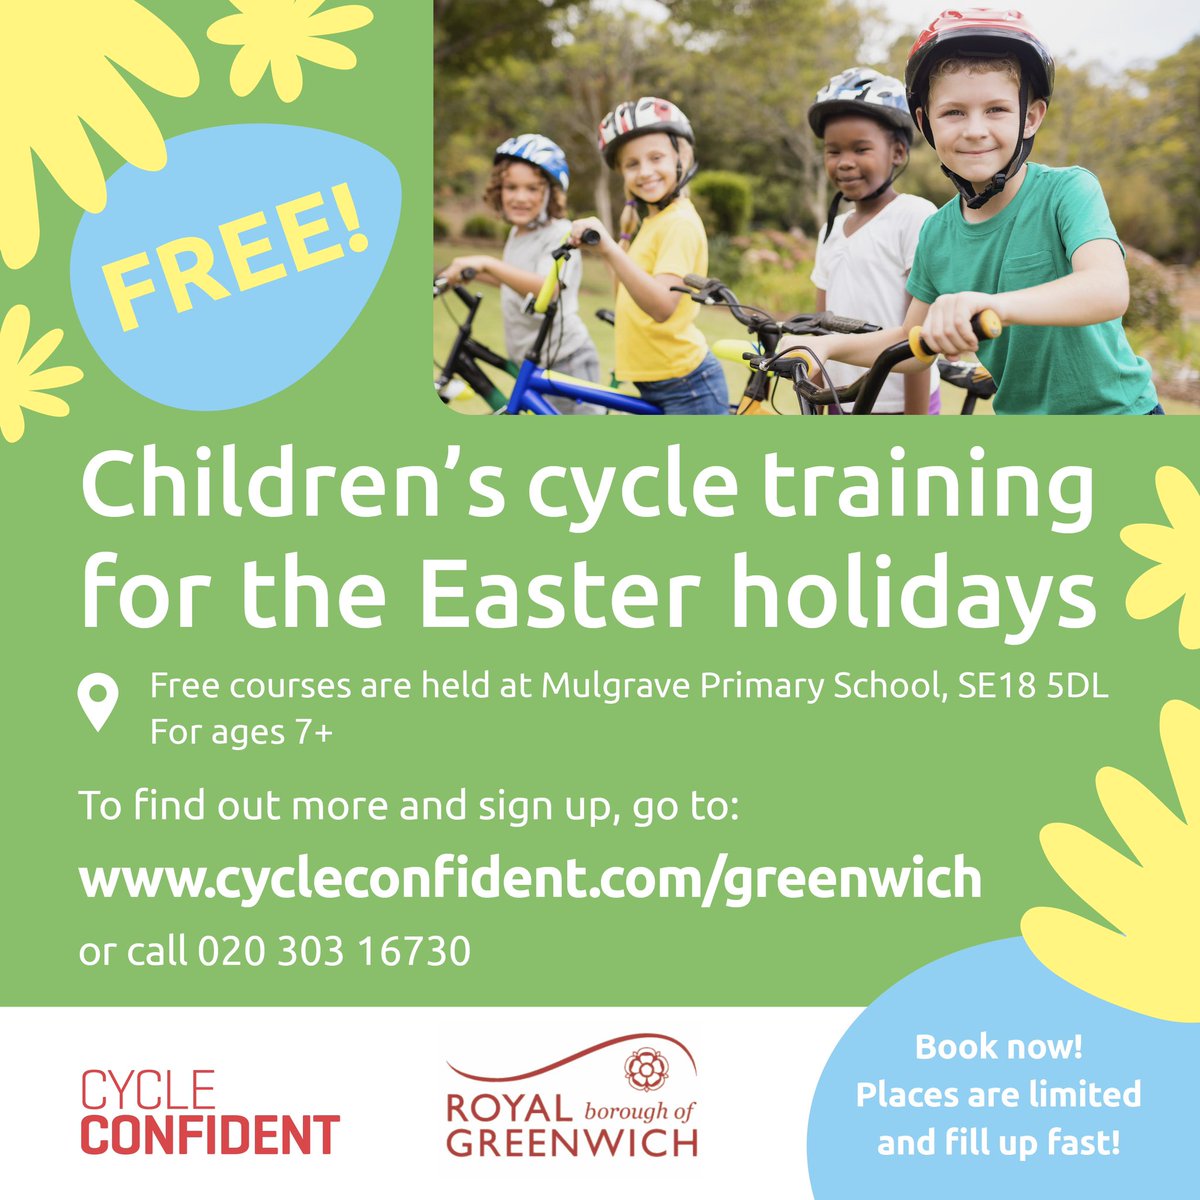 A great opportunity for children to attend FREE cycle training over the Easter holidays 🚲